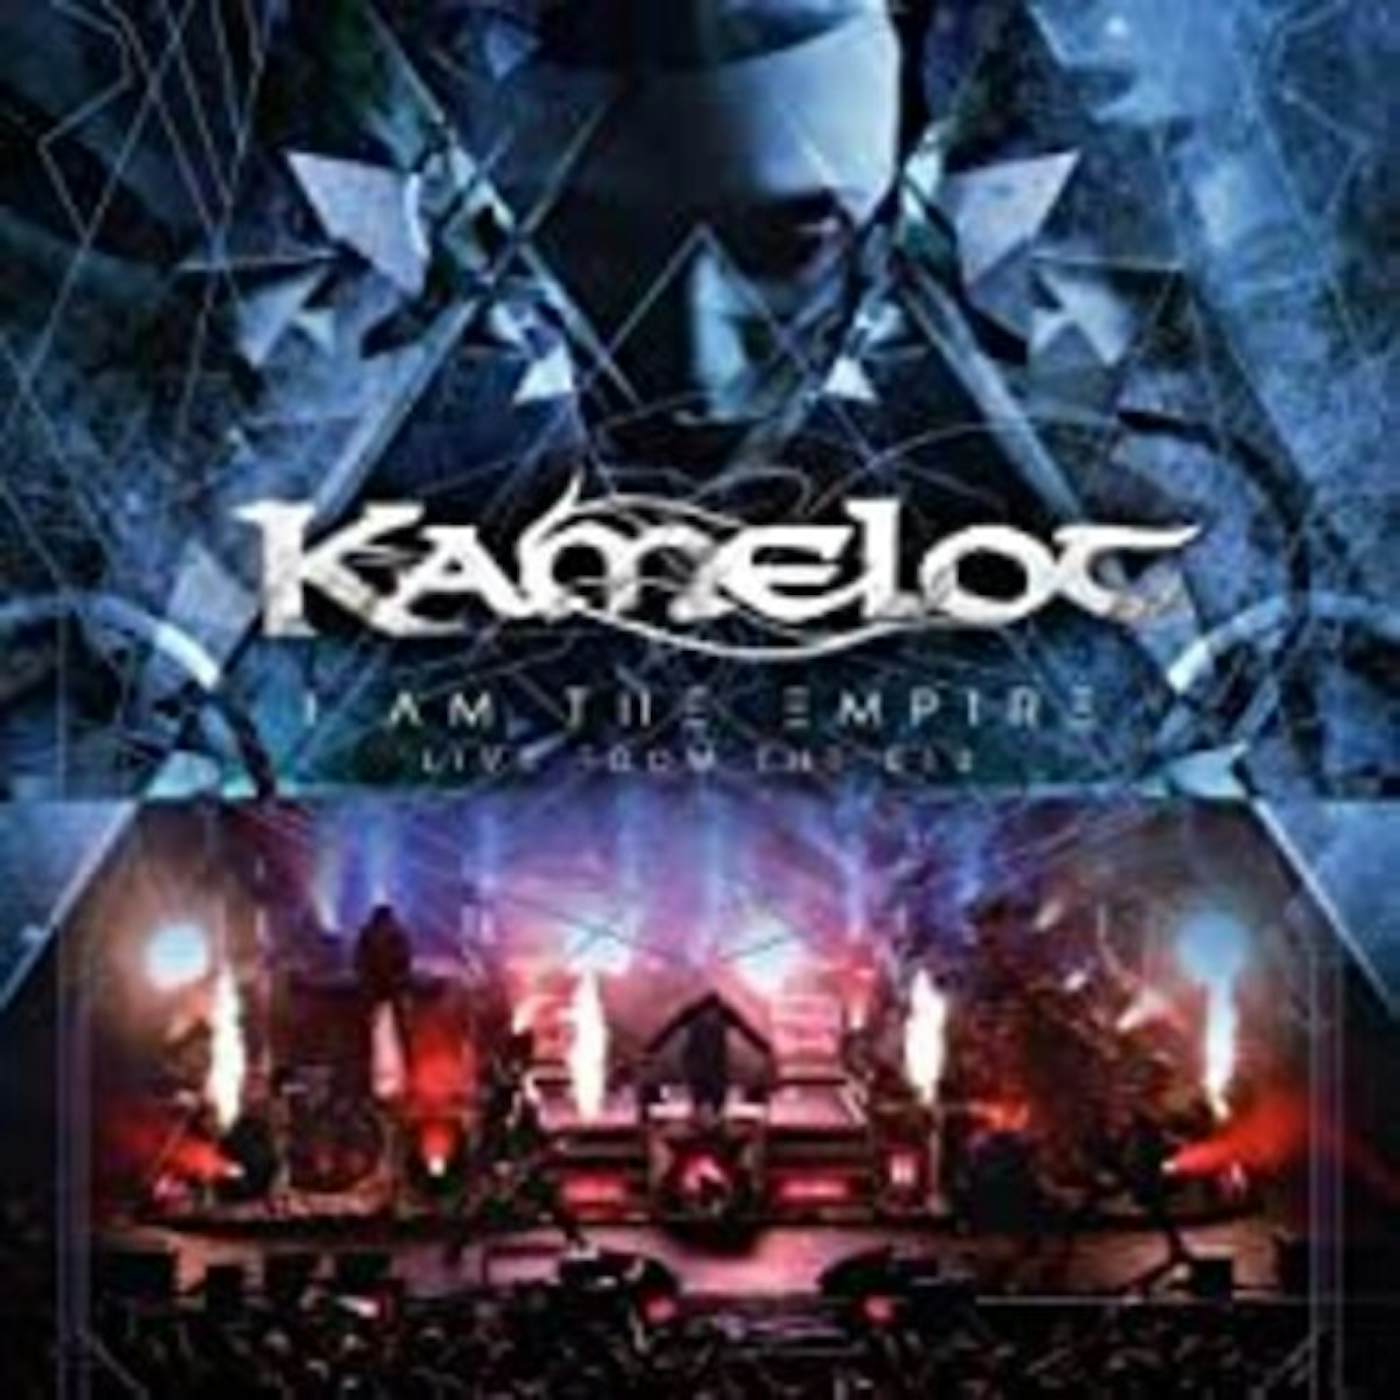 Kamelot I AM THE EMPIRE (LIVE FROM THE 013) Blu-ray